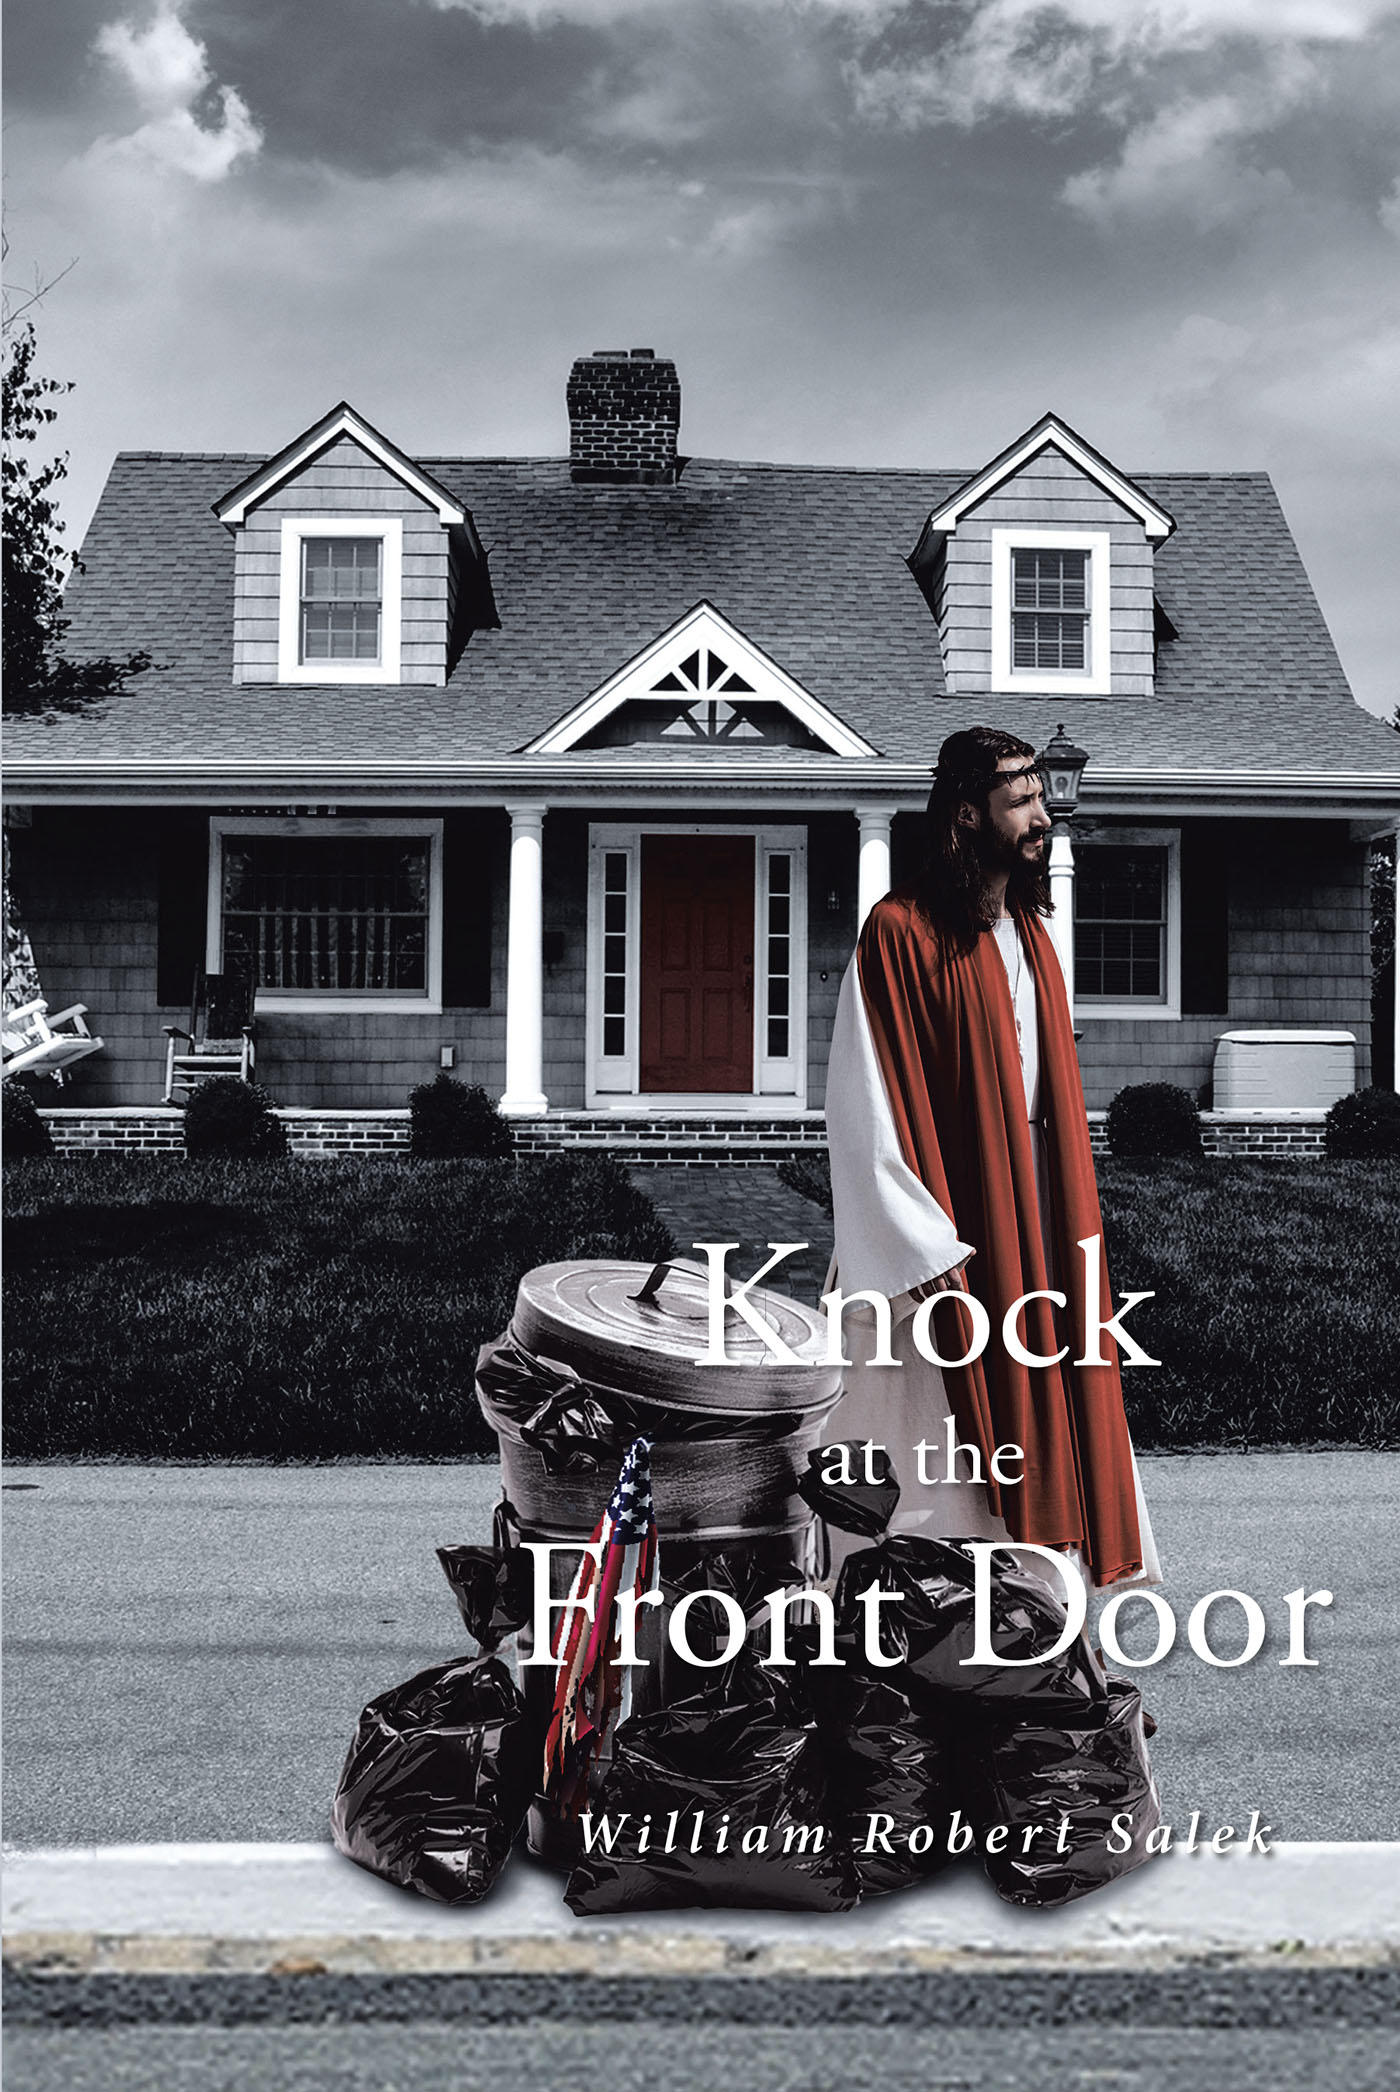 Author William Robert Salek’s New Book, "Knock at the Front Door," Follows a Senior Detective Who Has Spent Forty Years Investigating Hundreds of Serious Crimes